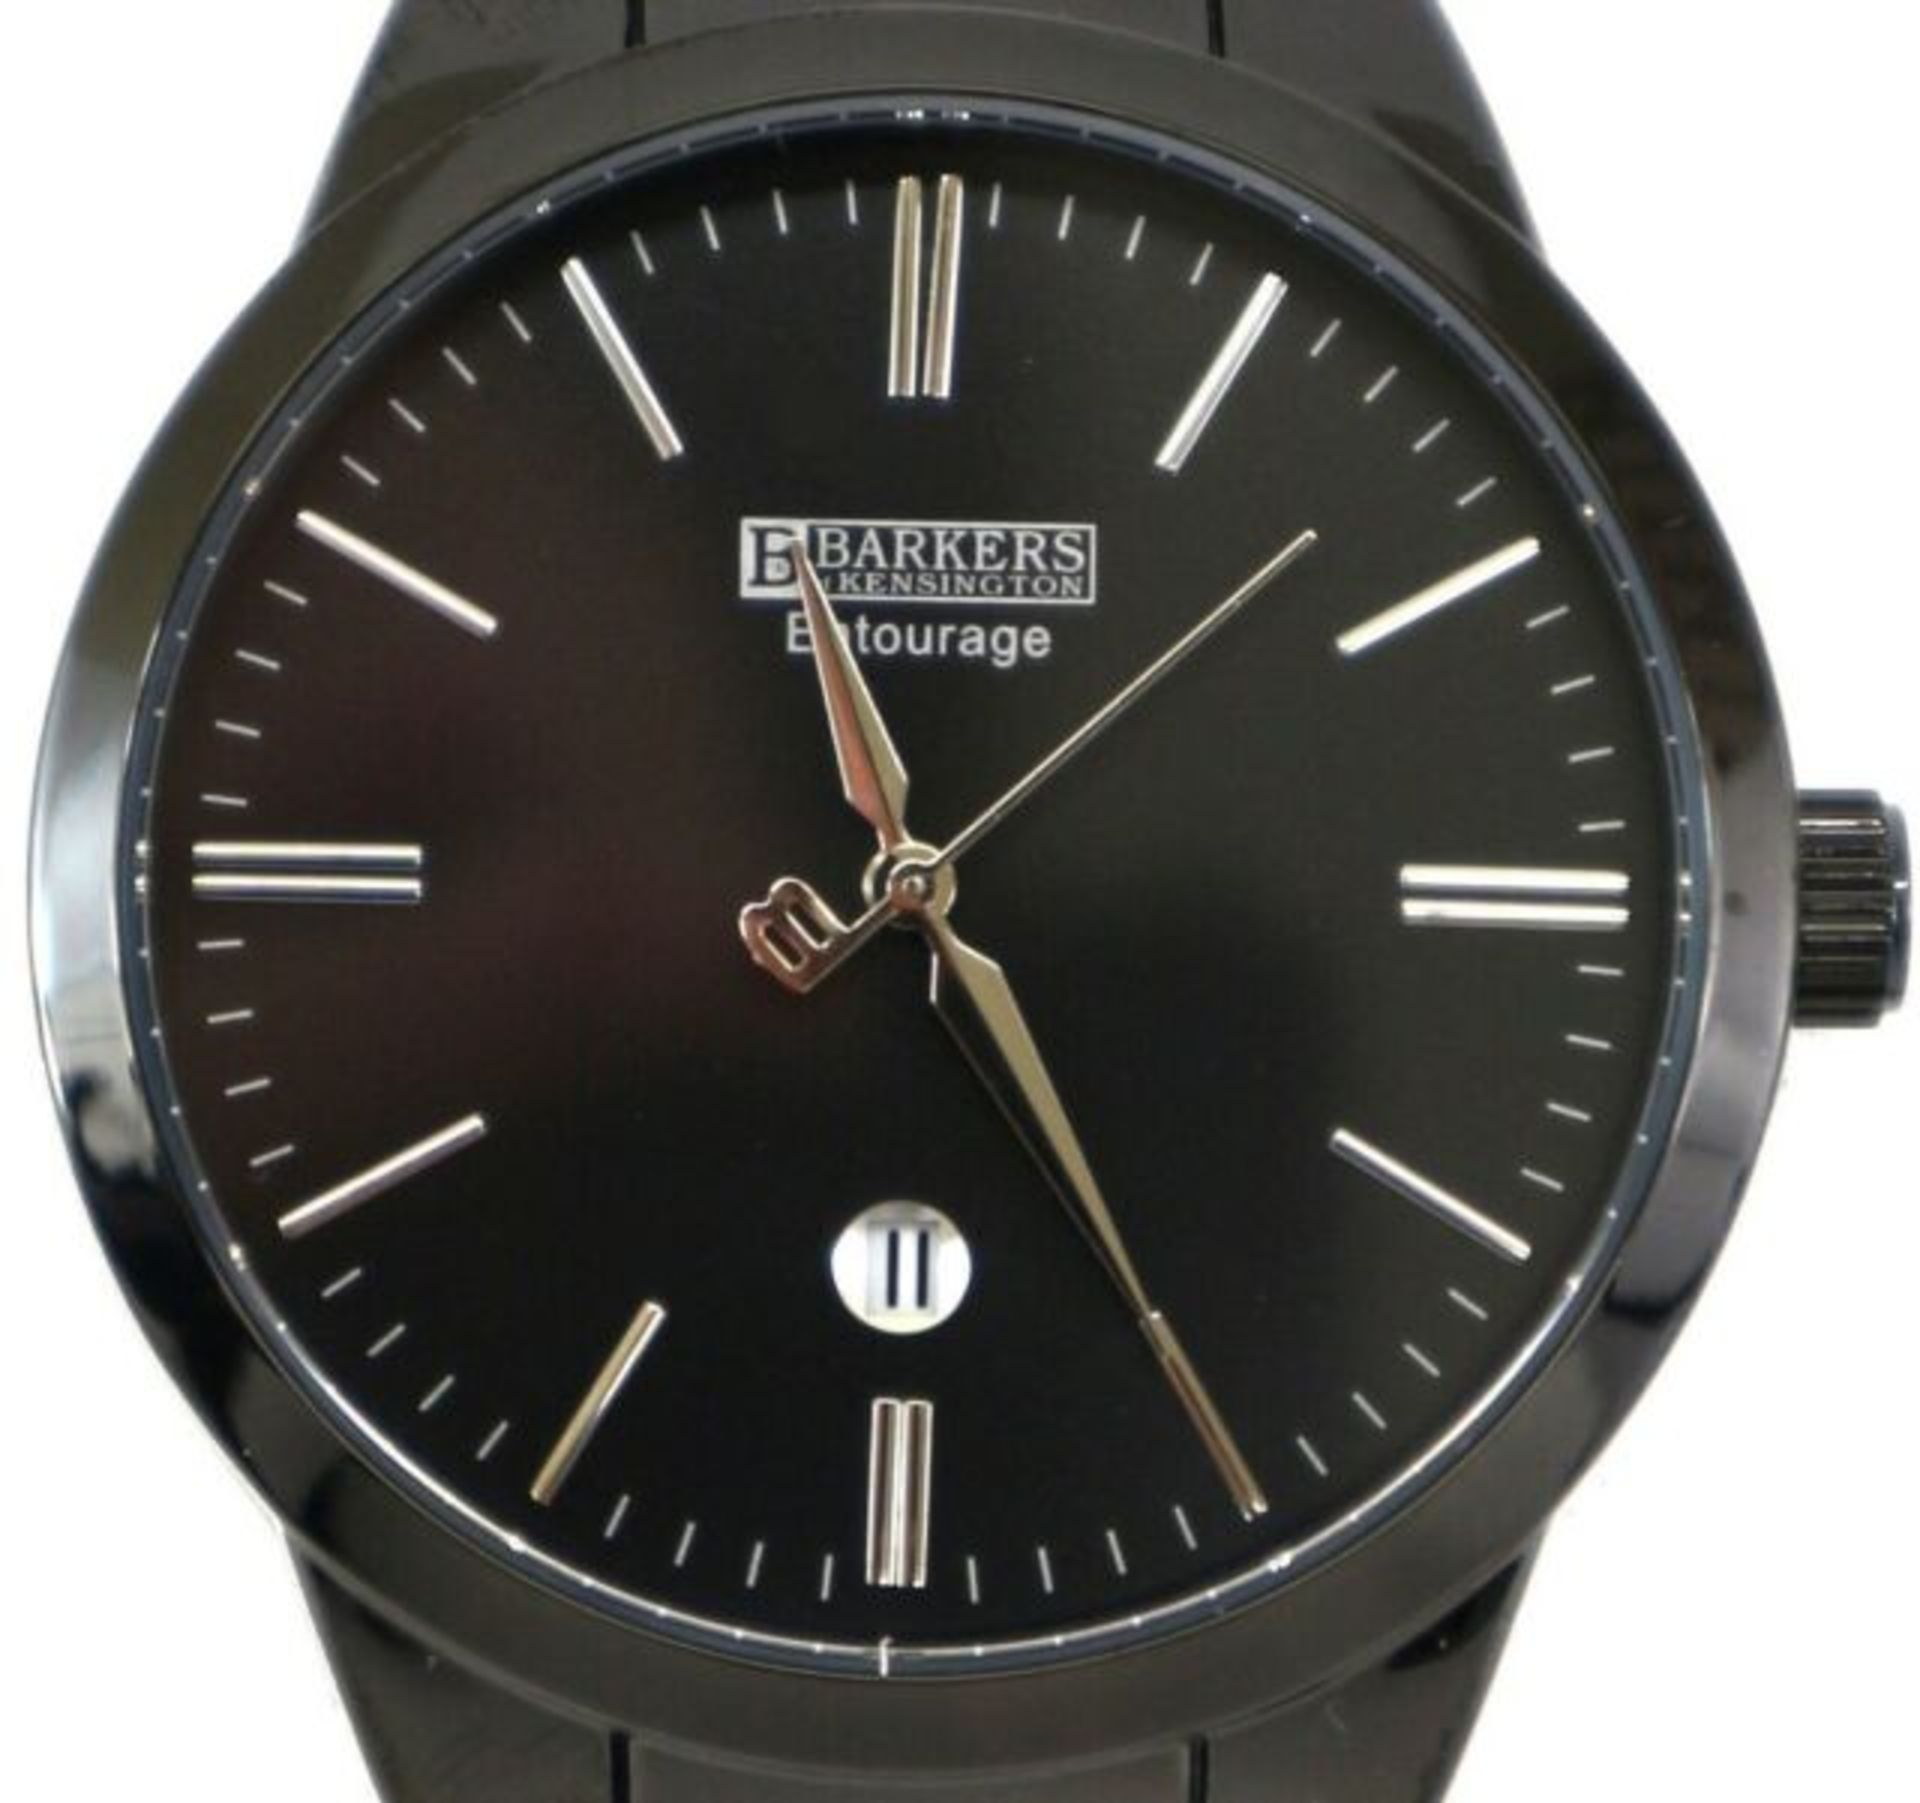 Barkers of Kensington Entourage Black Face with Silver Men's stylish Watch, new and boxed. - Image 3 of 3